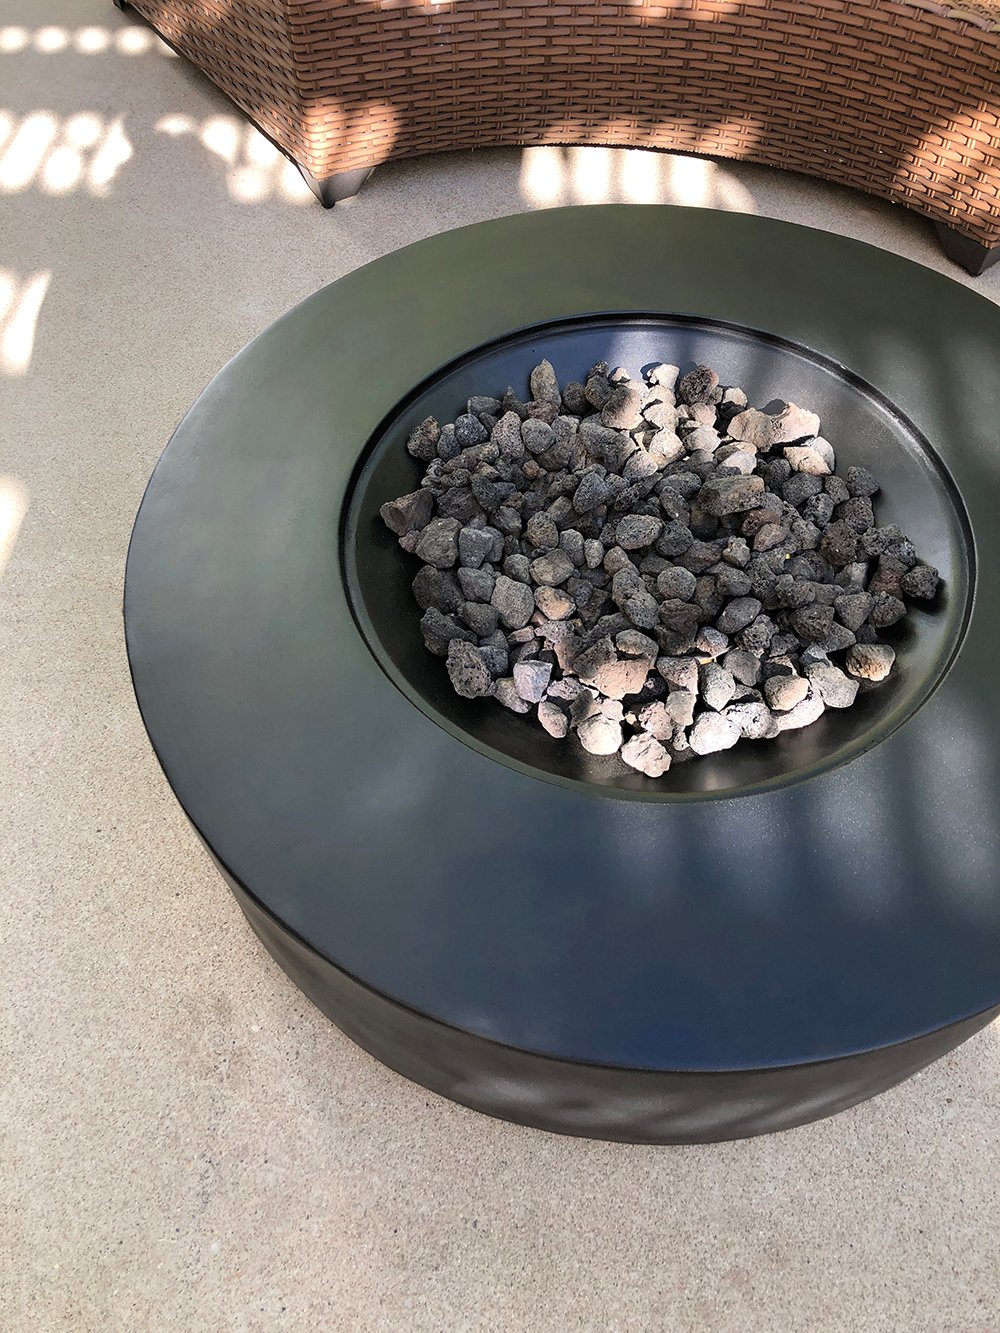 A Fire Pit Makeover - roomfortuesday.com